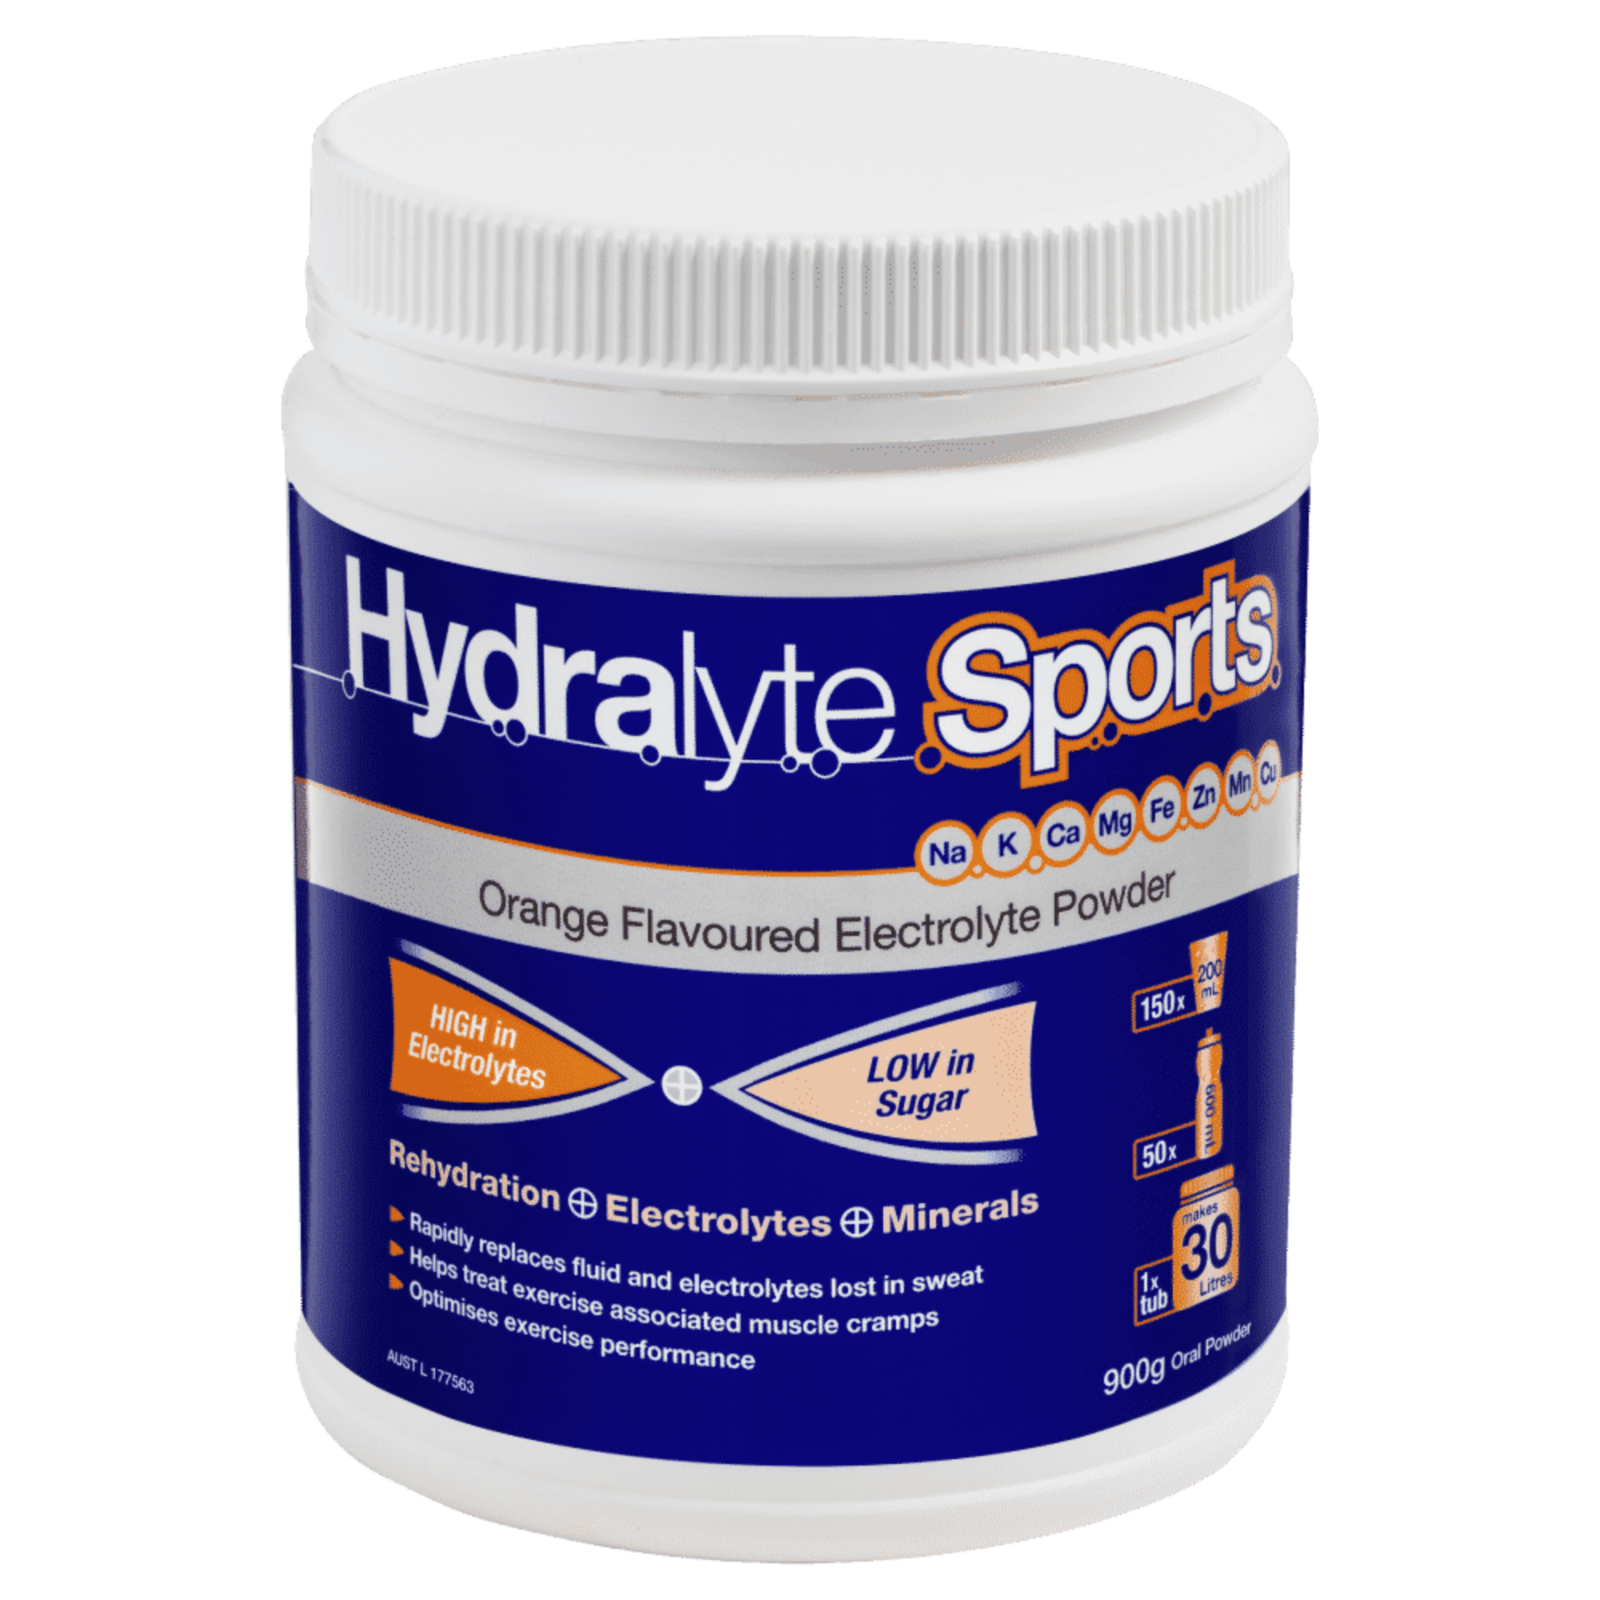 Primary image for Hydralyte Sports Orange Flavoured Electrolyte Powder 900g